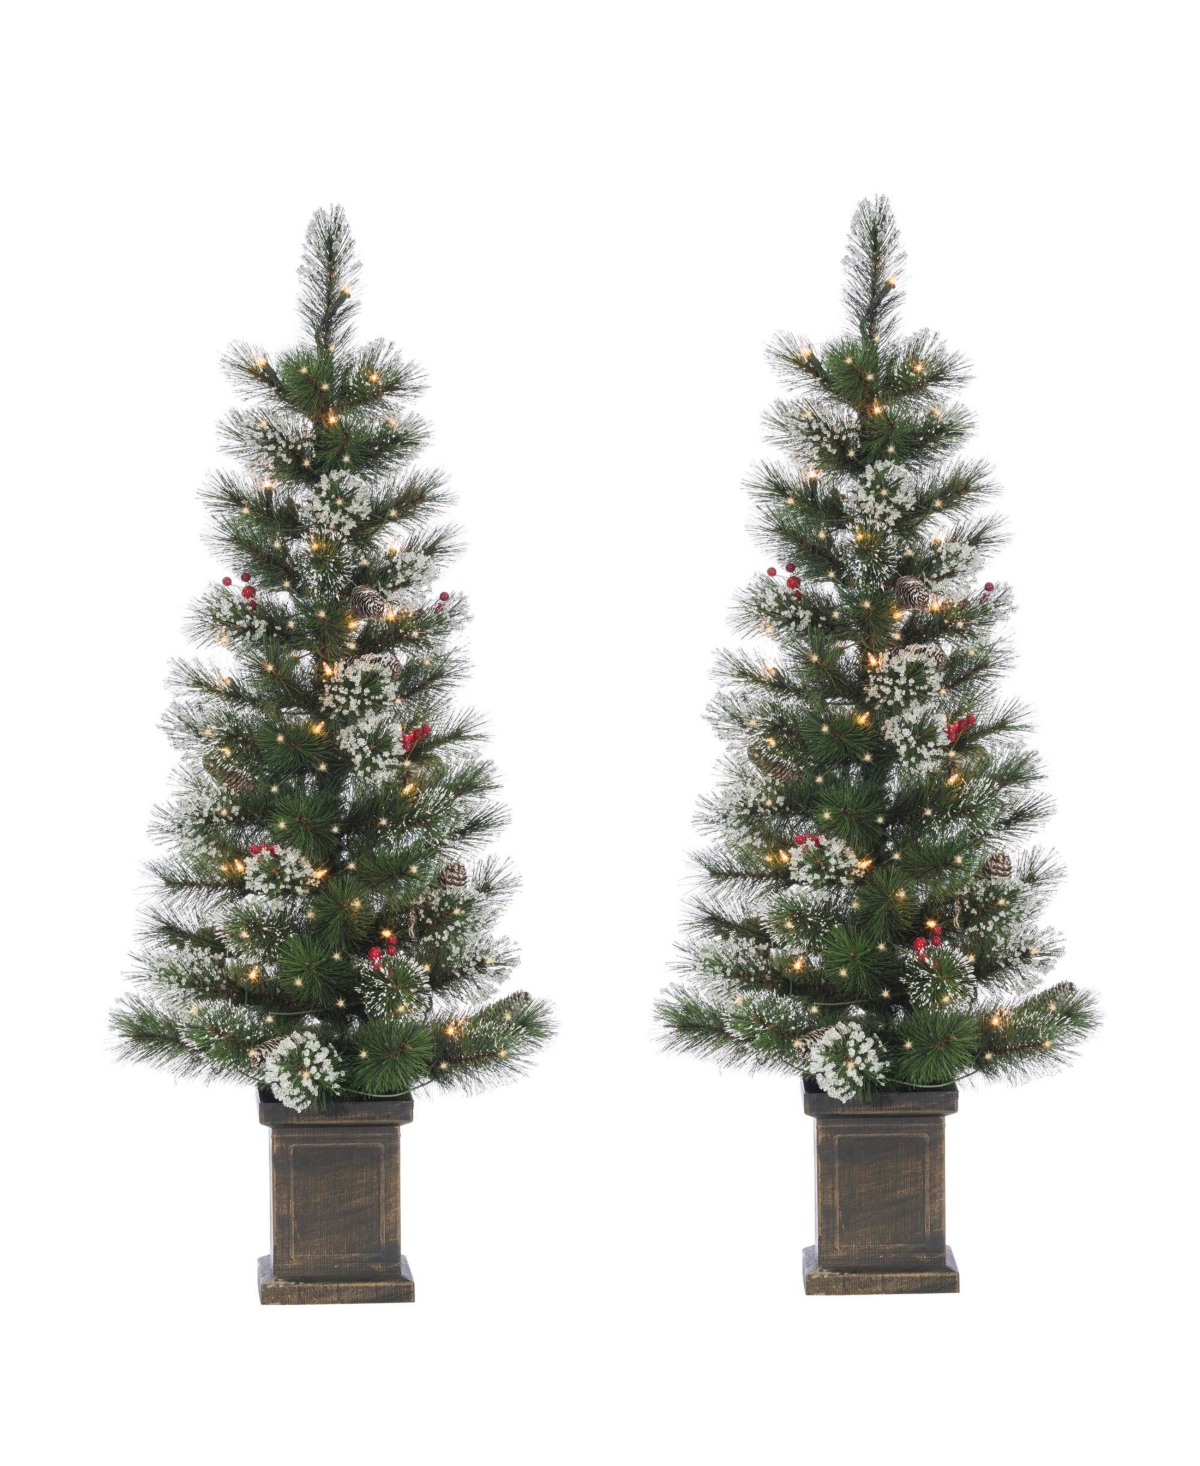 4Ft Potted Hard Mixed Needle Loveland Spruce with Iced Tips, Pine Cones, Red Berries and 50 Clear White Lights - Set of 2 - Green